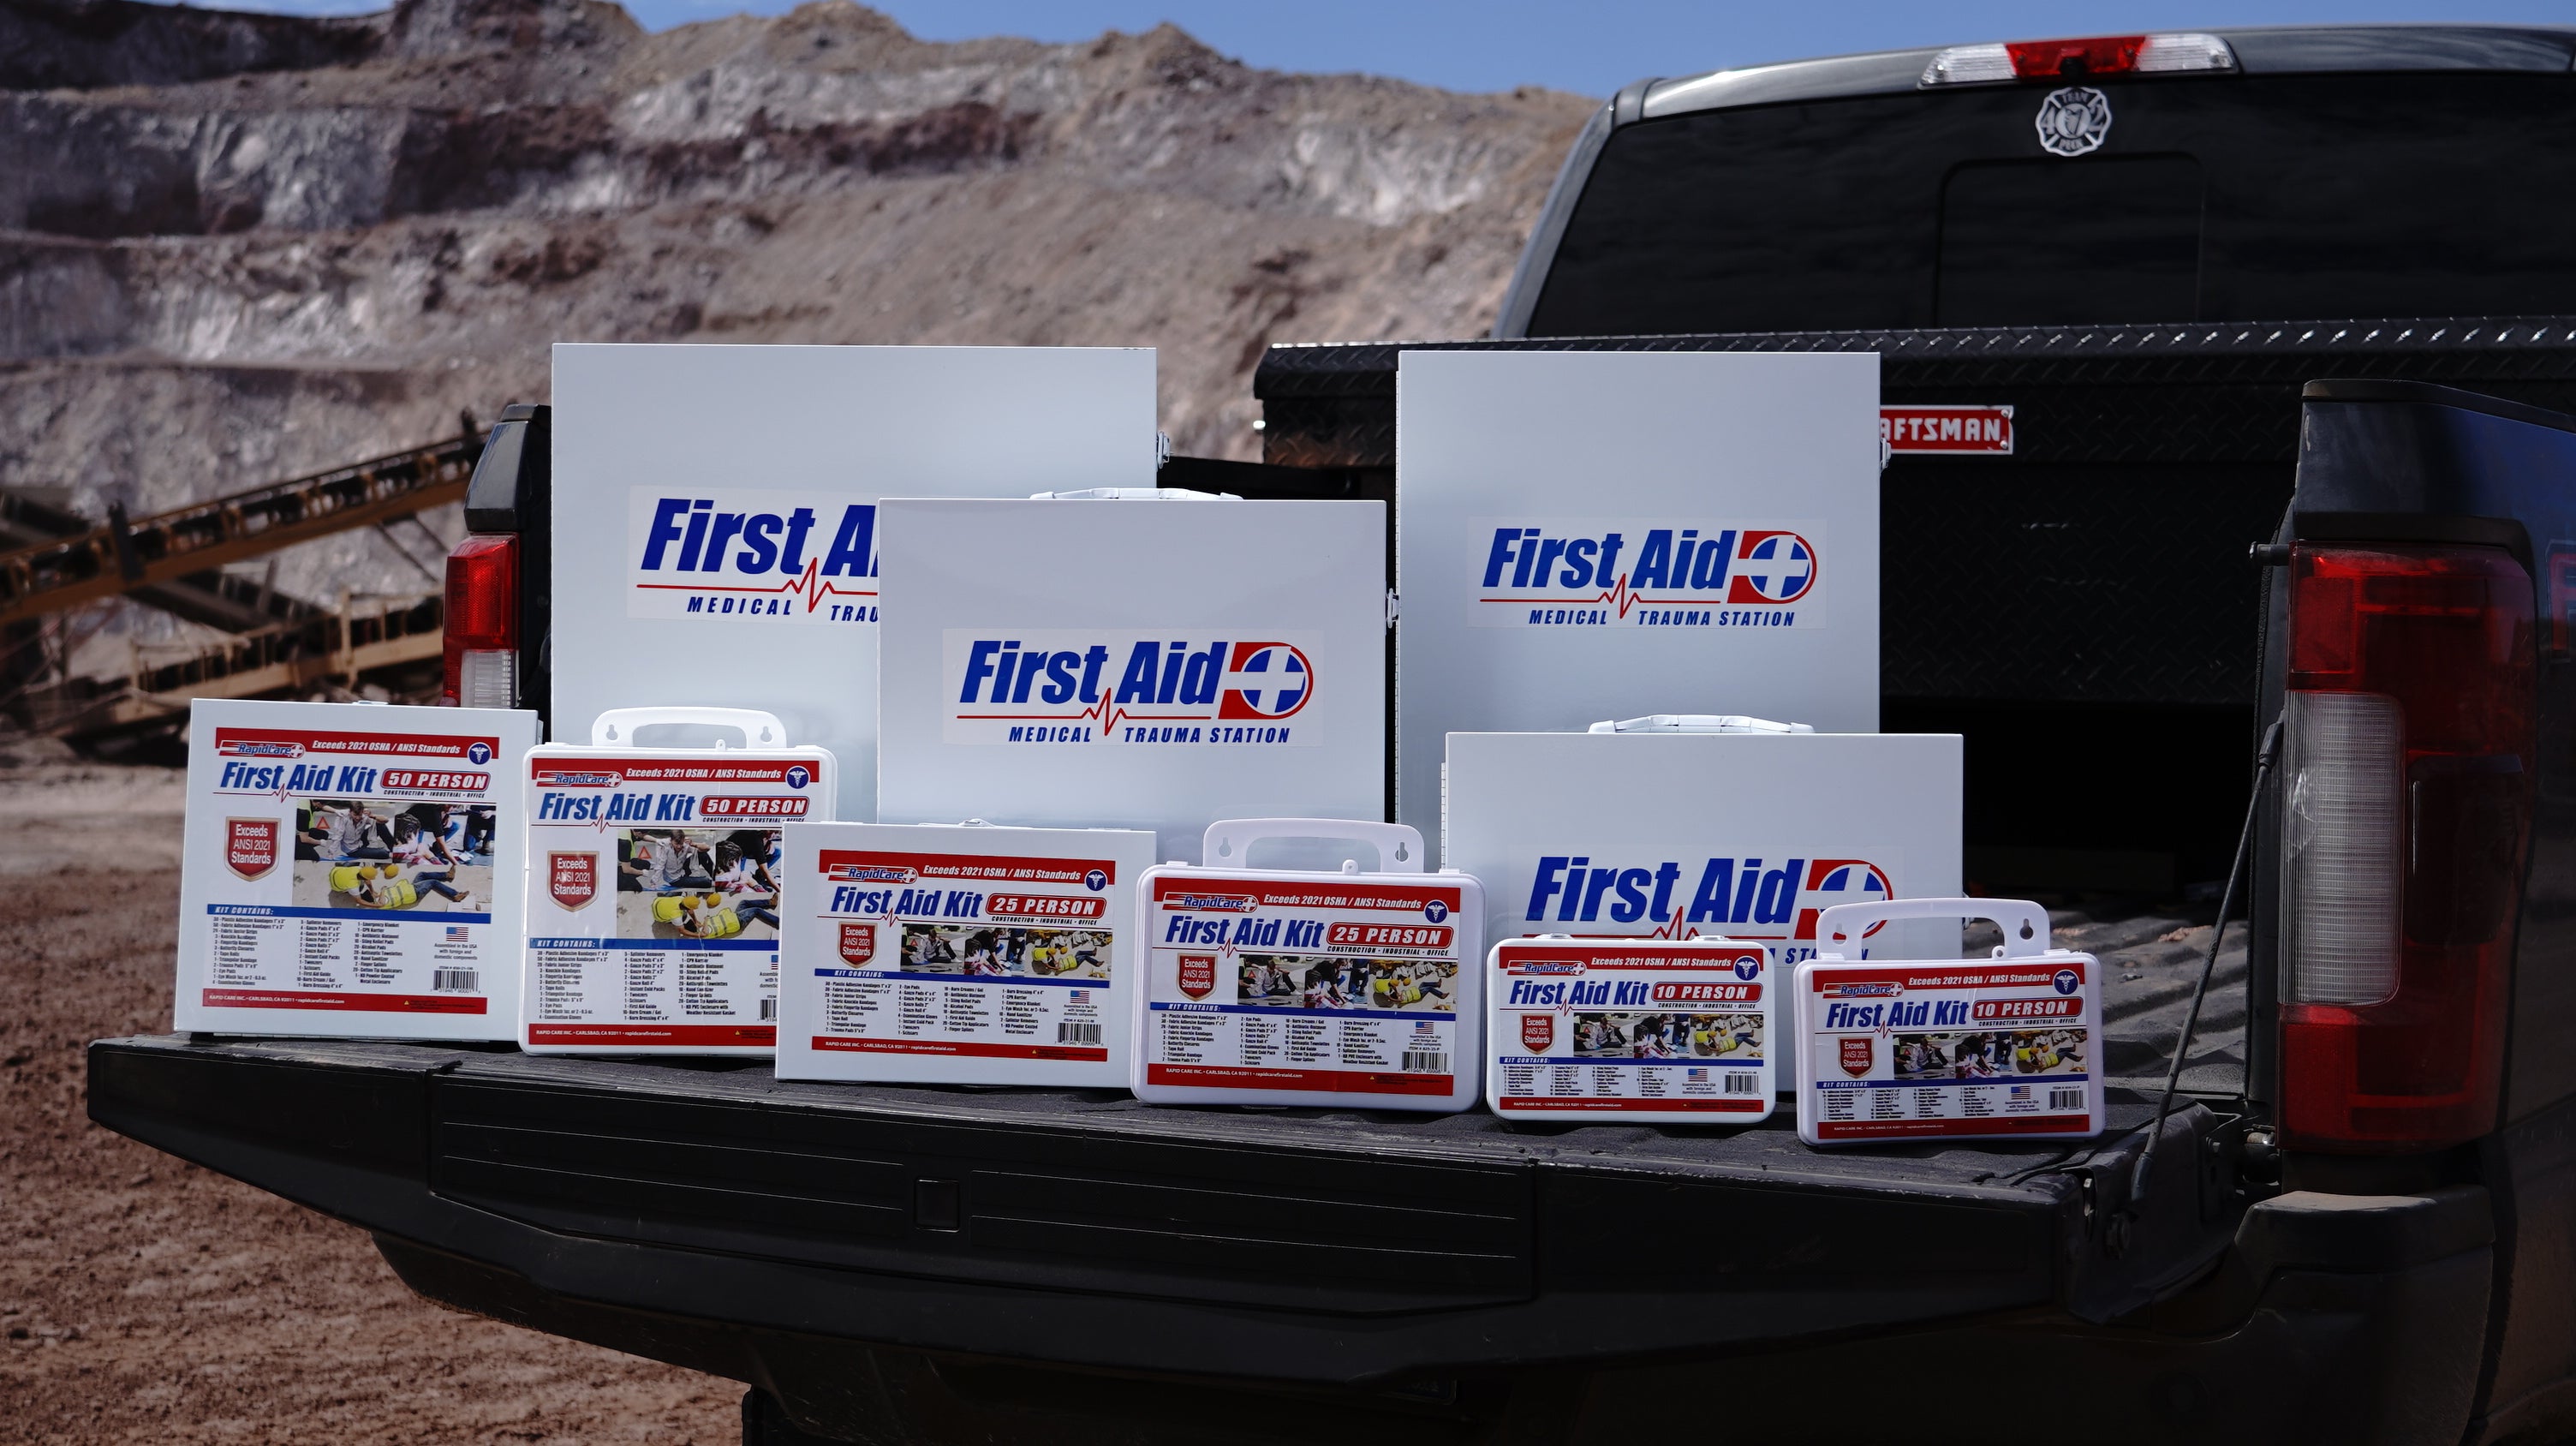 industrial first aid kit job site safety employee safety - first aid - first aid kits - first aid kit - rapid care first aid